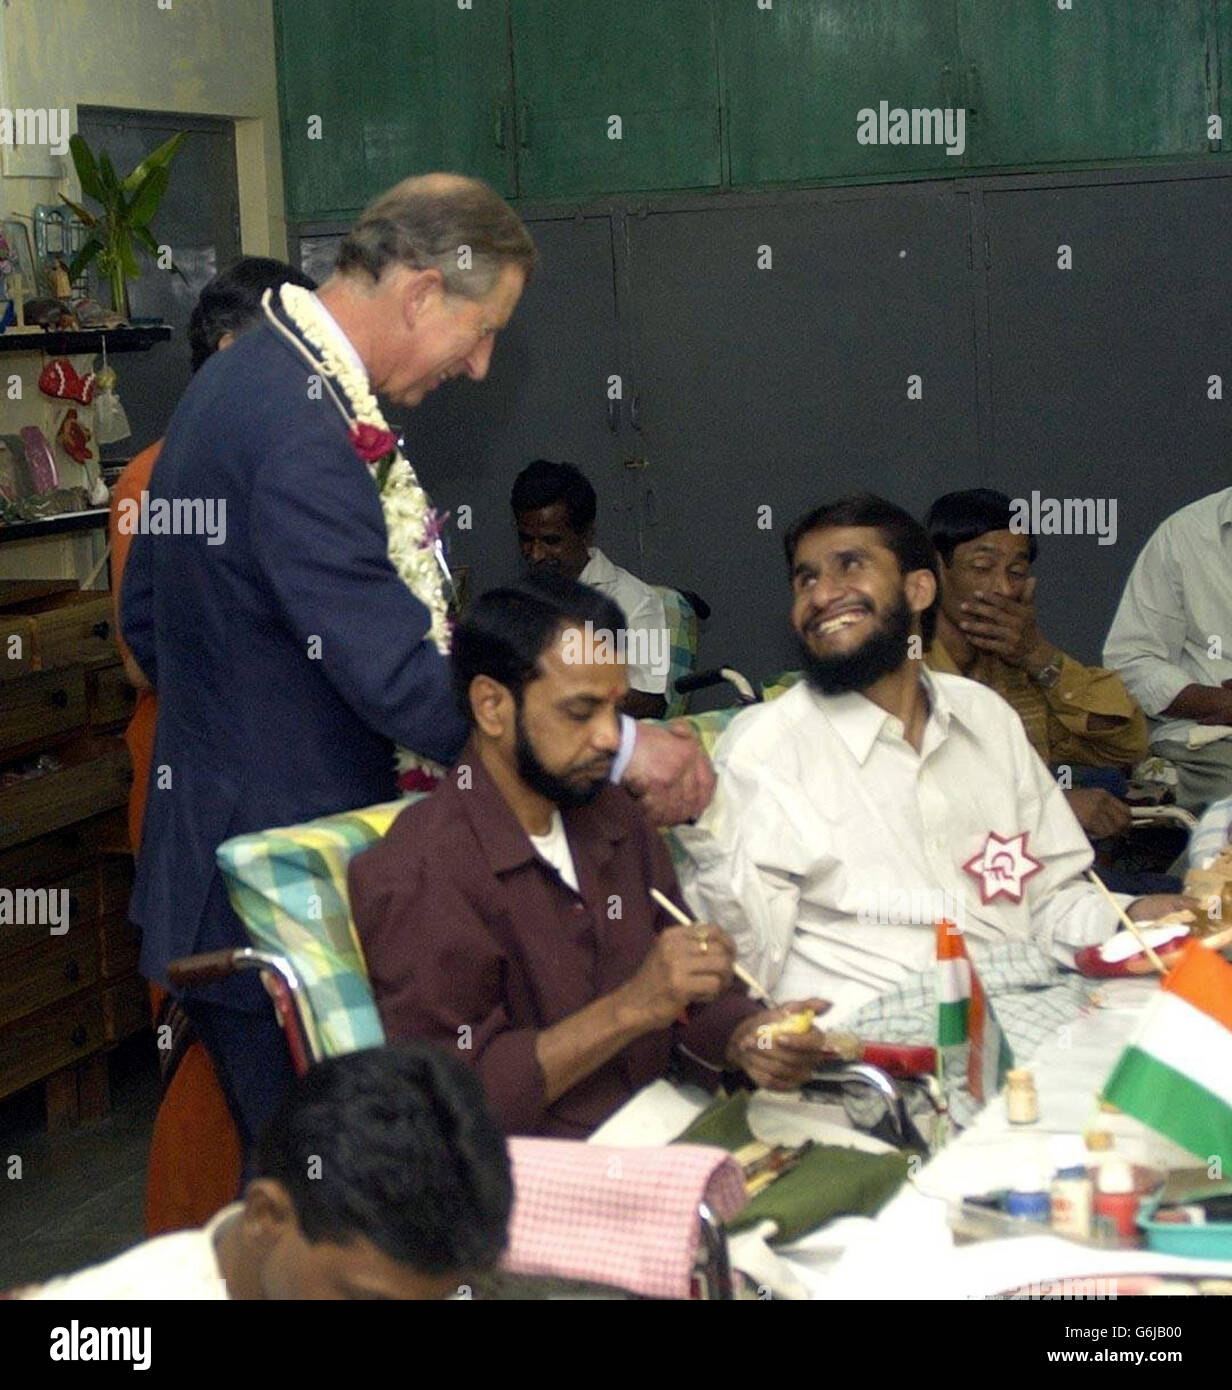 Prince Charles shakes hands with a man at the Cheshire Homes for disabled people during his visit of Mumbai, India. Stock Photo